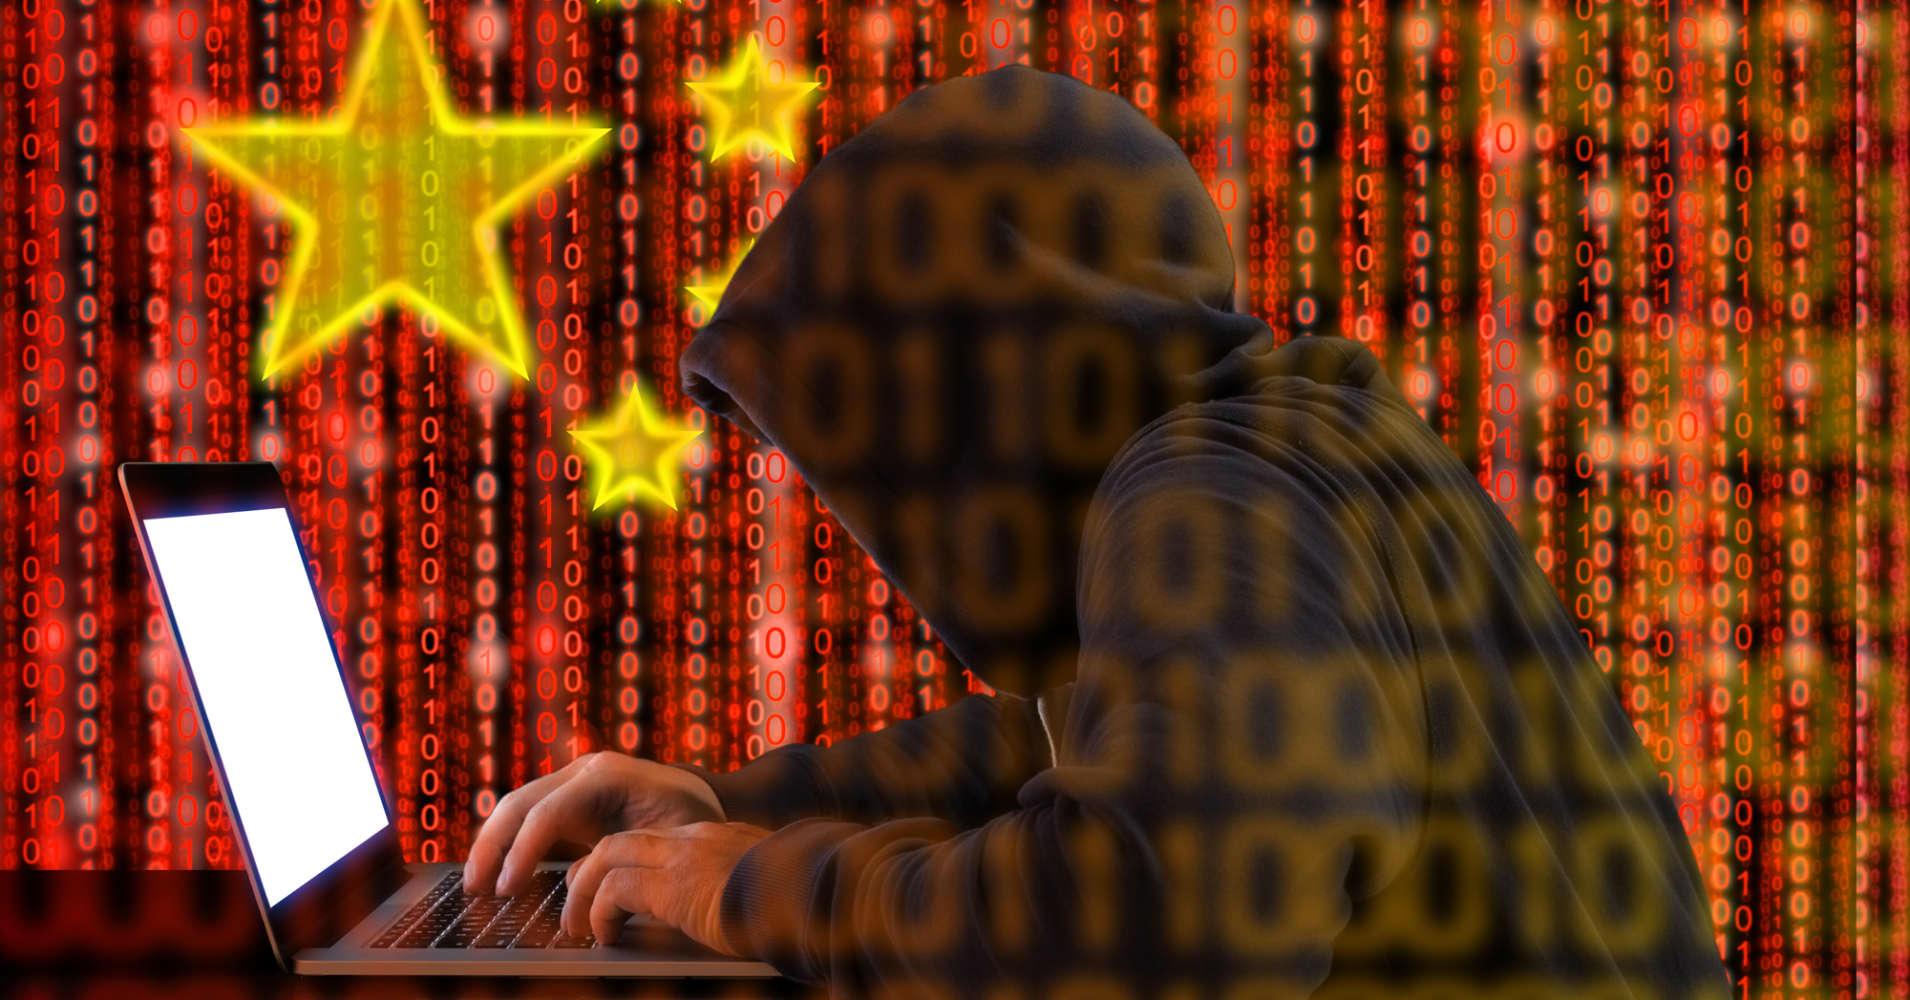 US tech firms fear China could be spying on them using power cords, report says